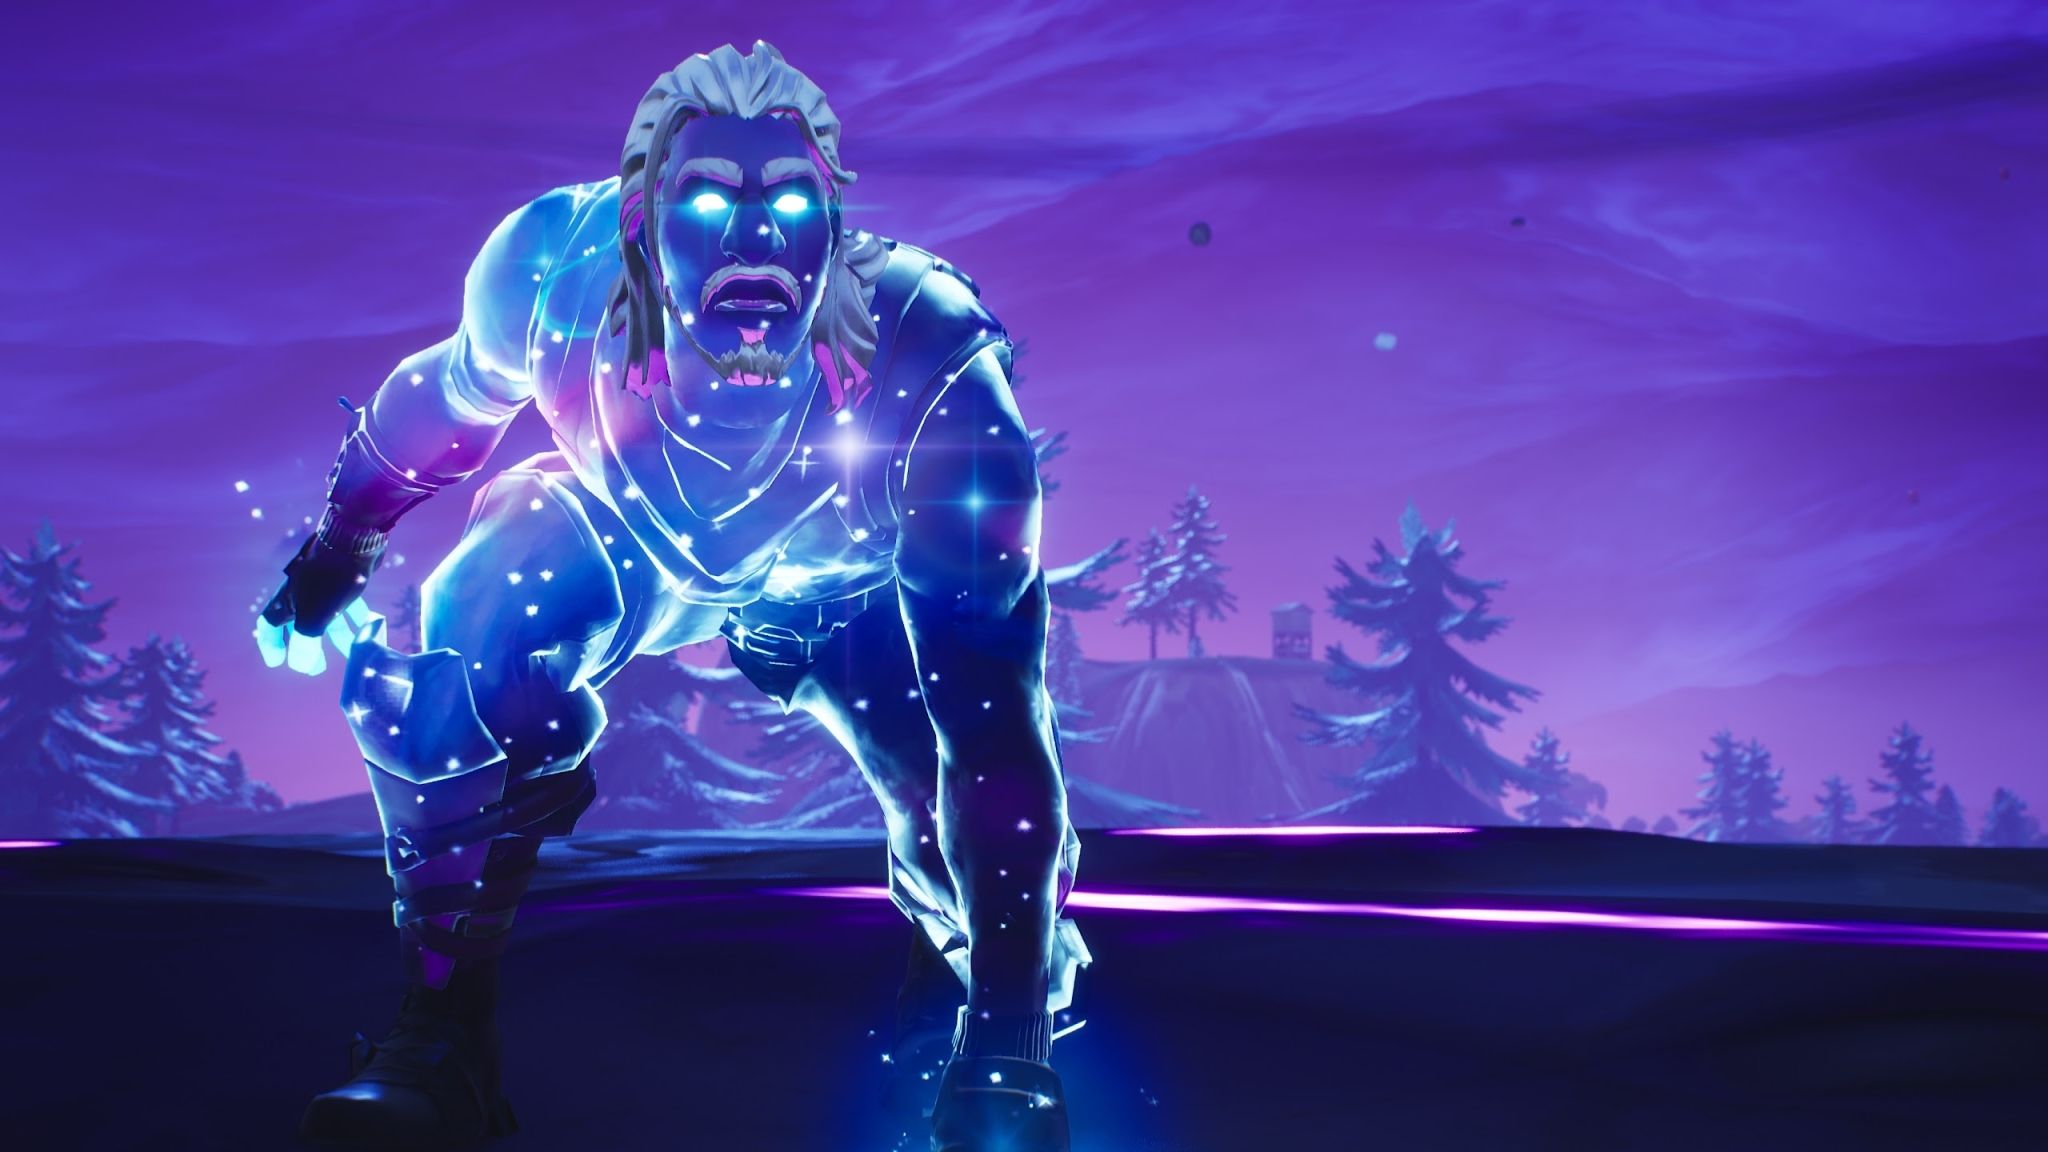 Fortnite 2048x1152 posted by Ryan Sellers